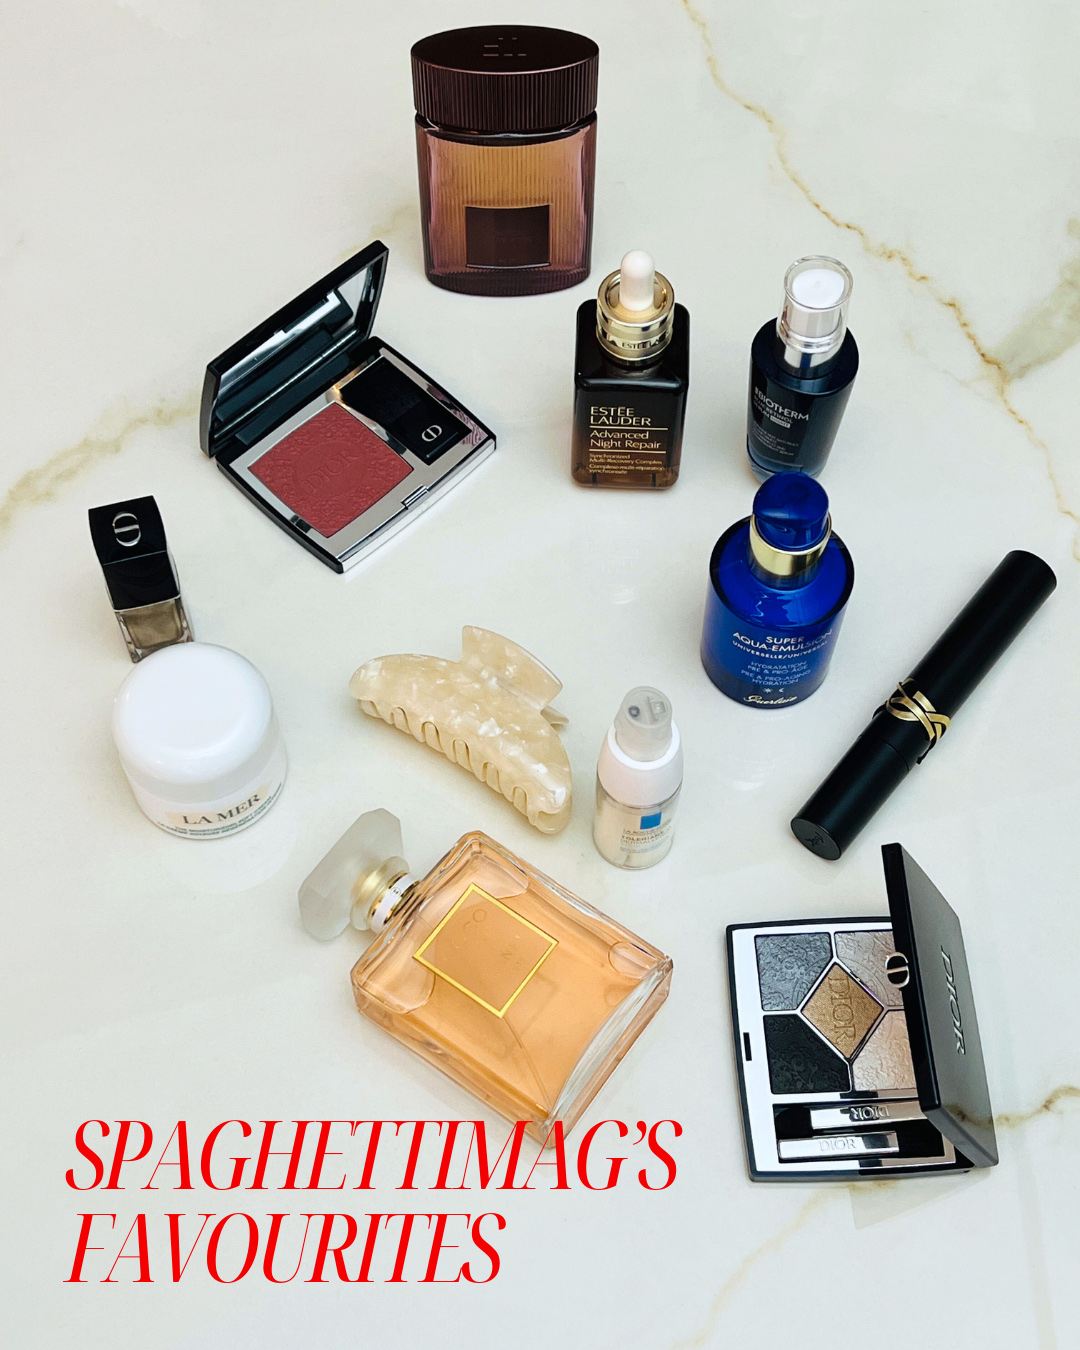 Spaghettimag’s favorites: beauty and more.